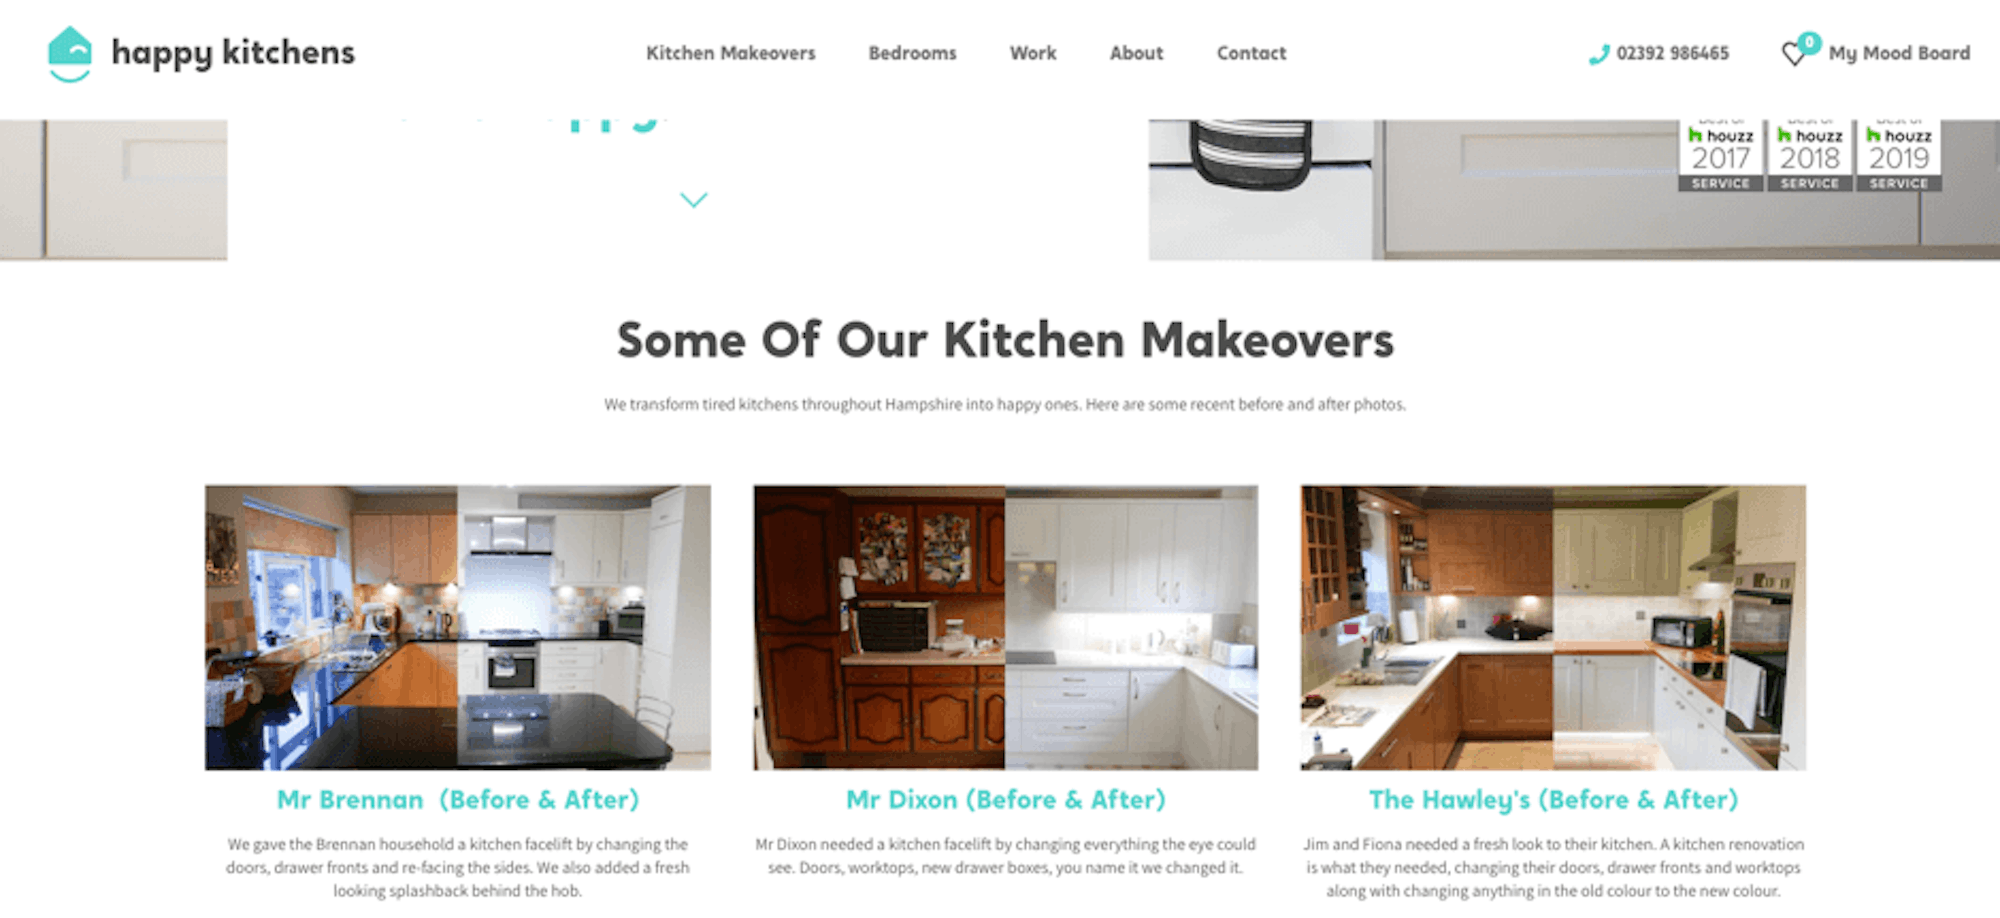 Happy Kitchens' home page. Case studies are used to establish brand credibility. Designed by Bigger Picture.